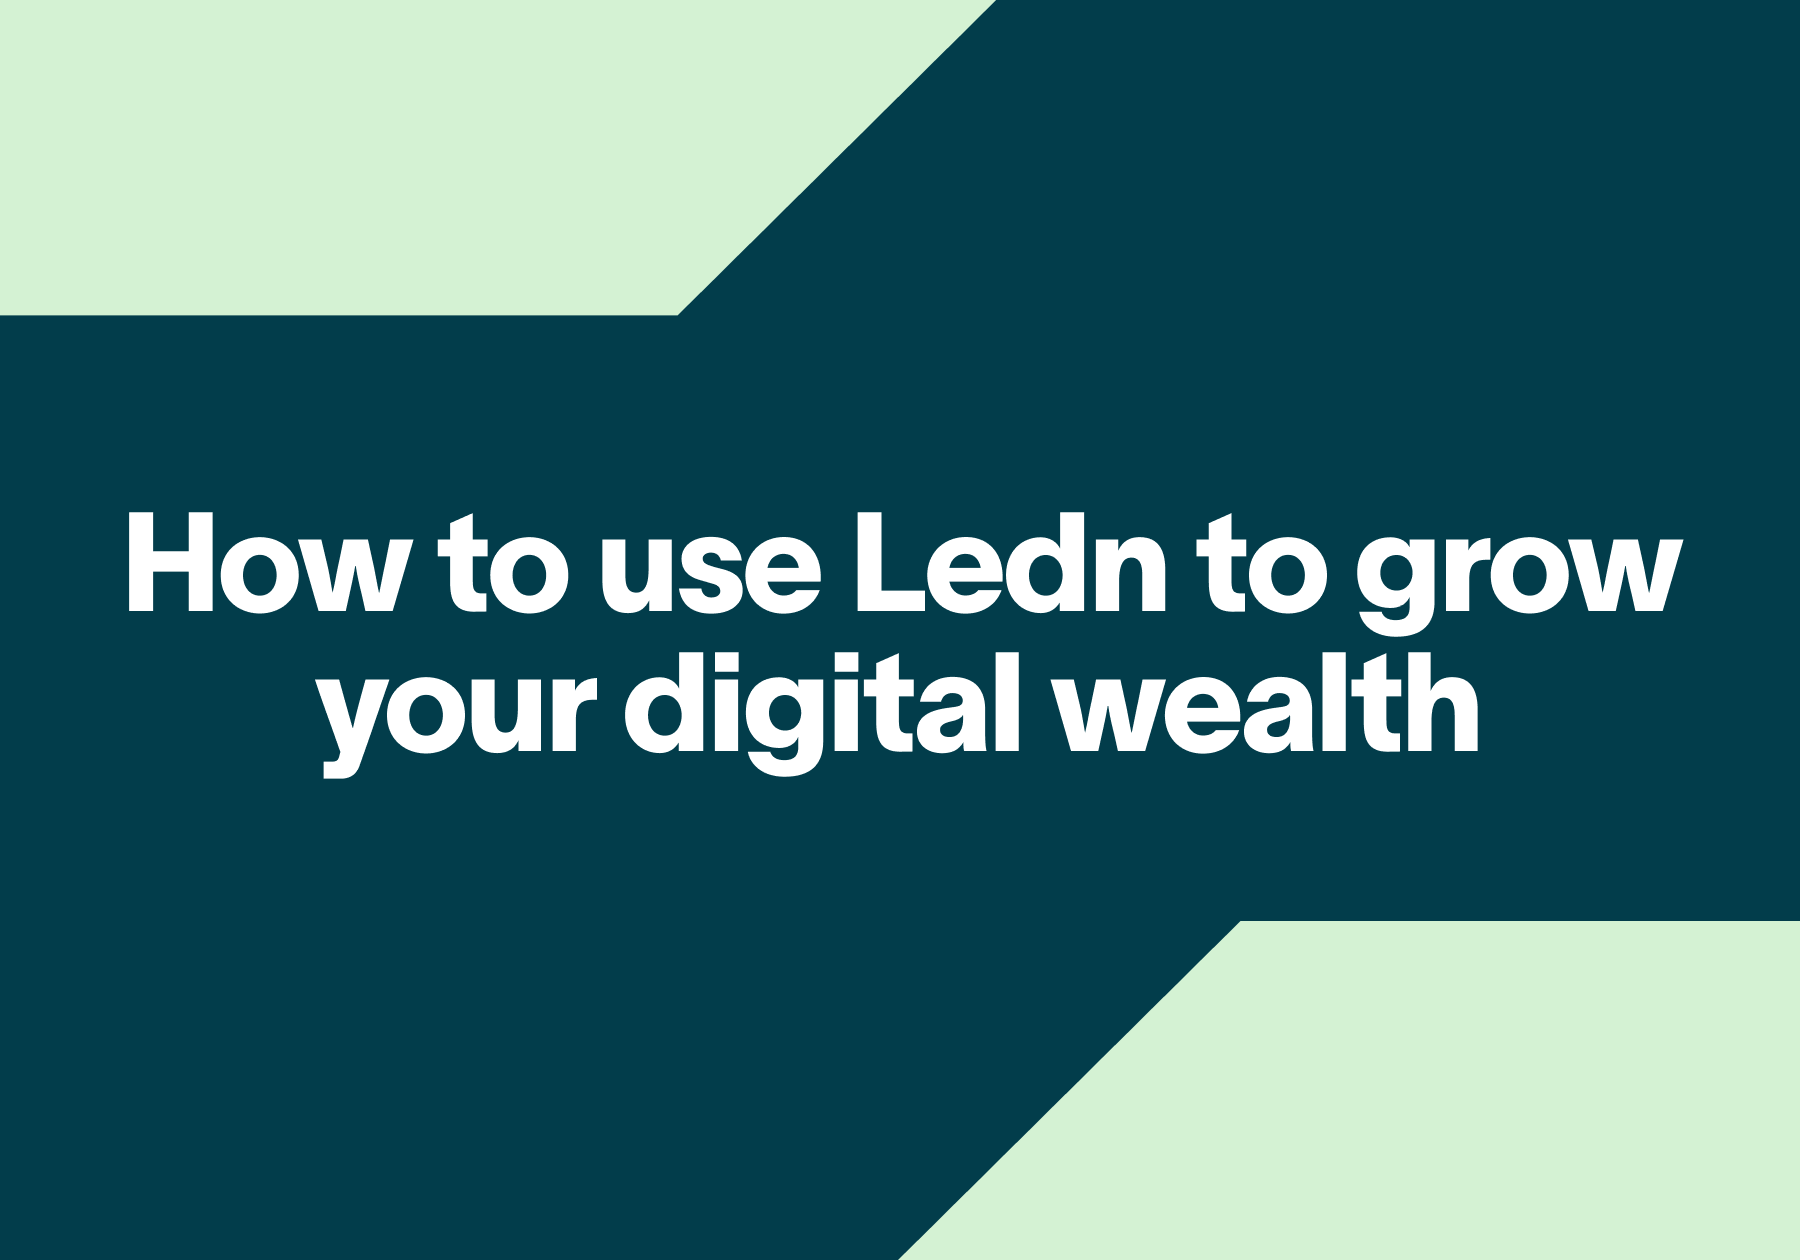 How to use Ledn to grow your digital wealth